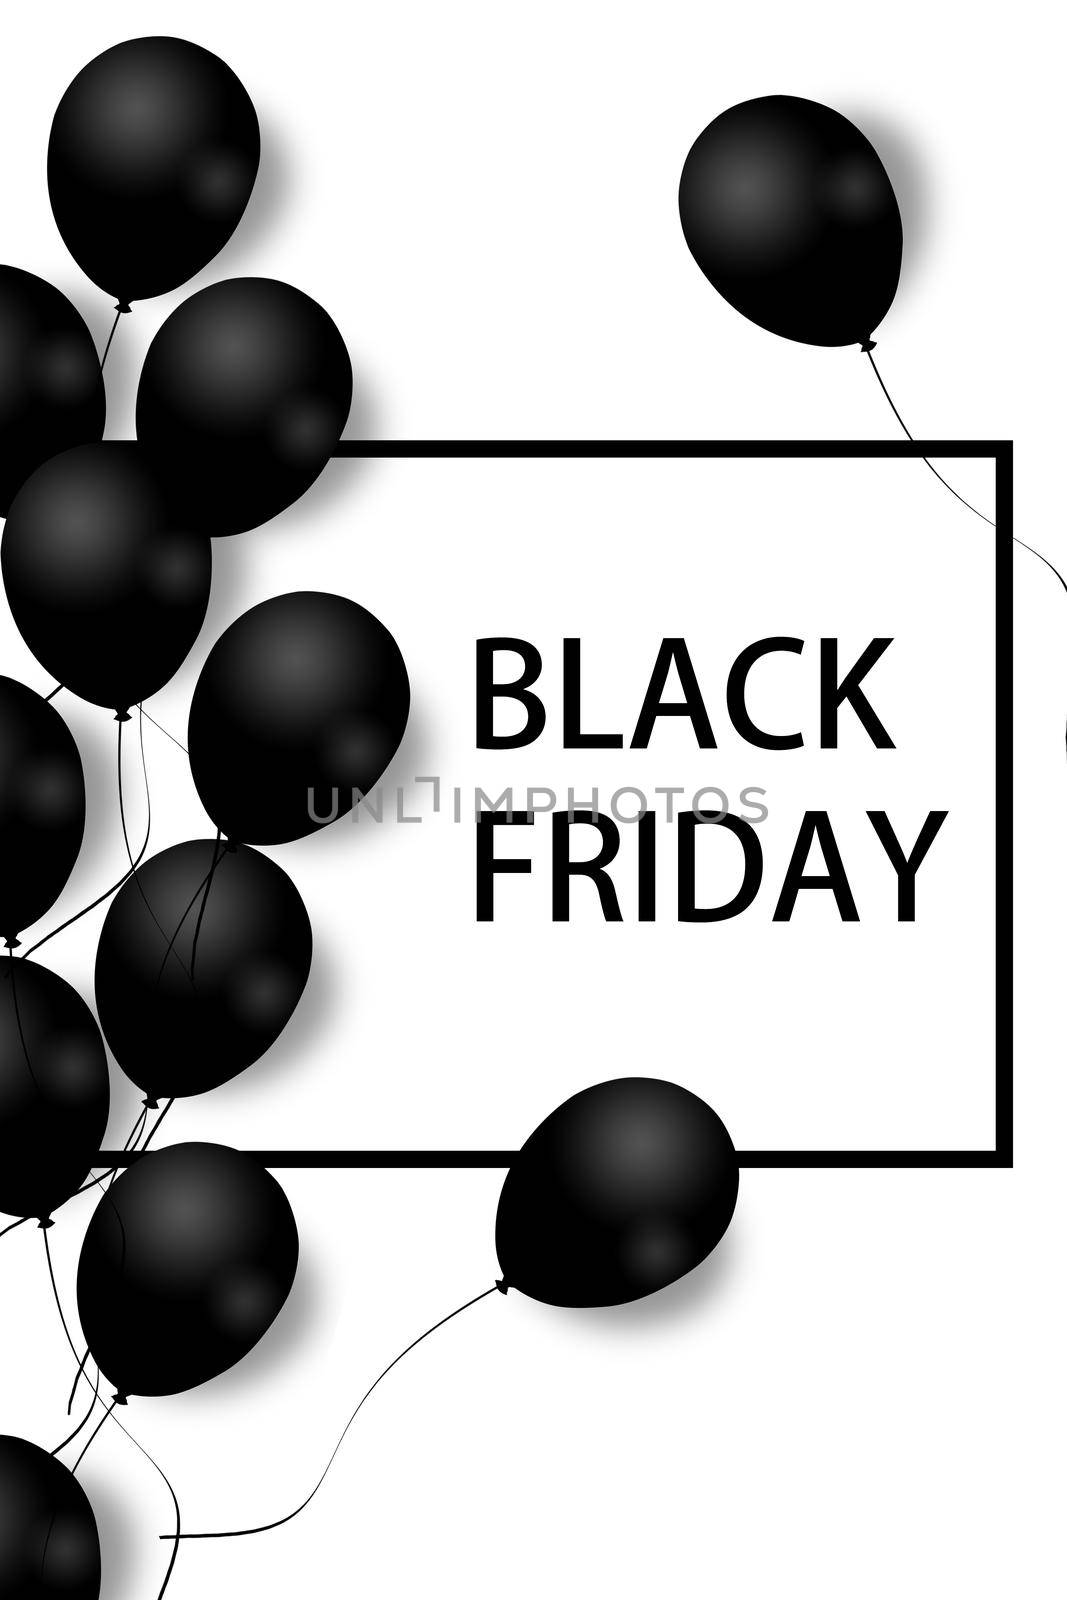 Black Friday Sale Poster with black balloons on white background with square frame. Illustration. Pattern